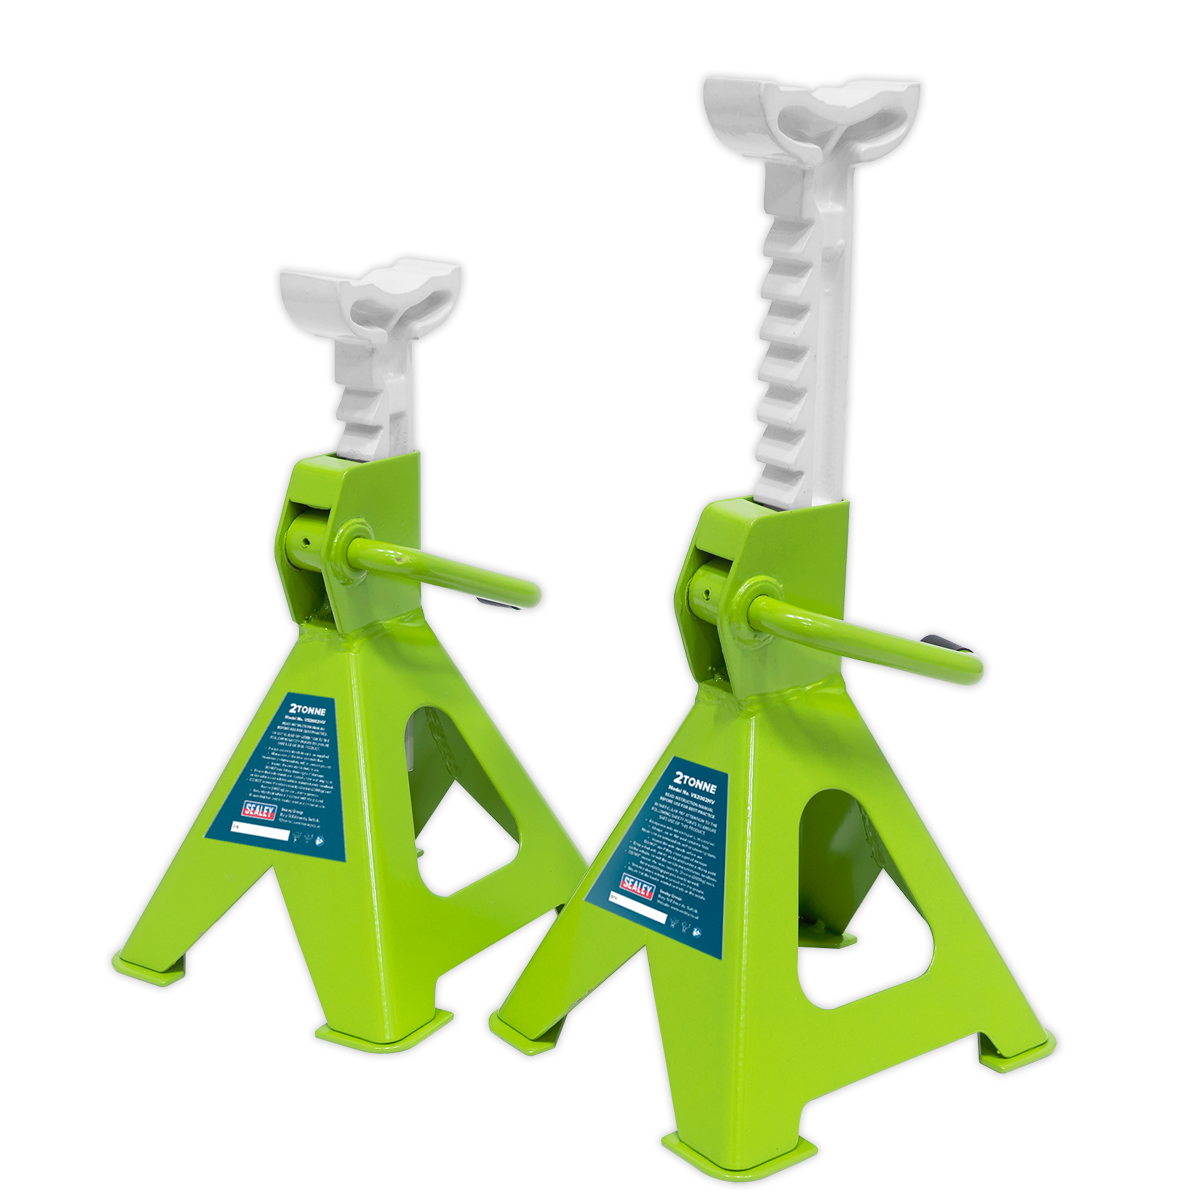 Sealey Axle Stands (Pair) 2 Tonne Capacity per Stand Ratchet Type - Hi-Vis Green